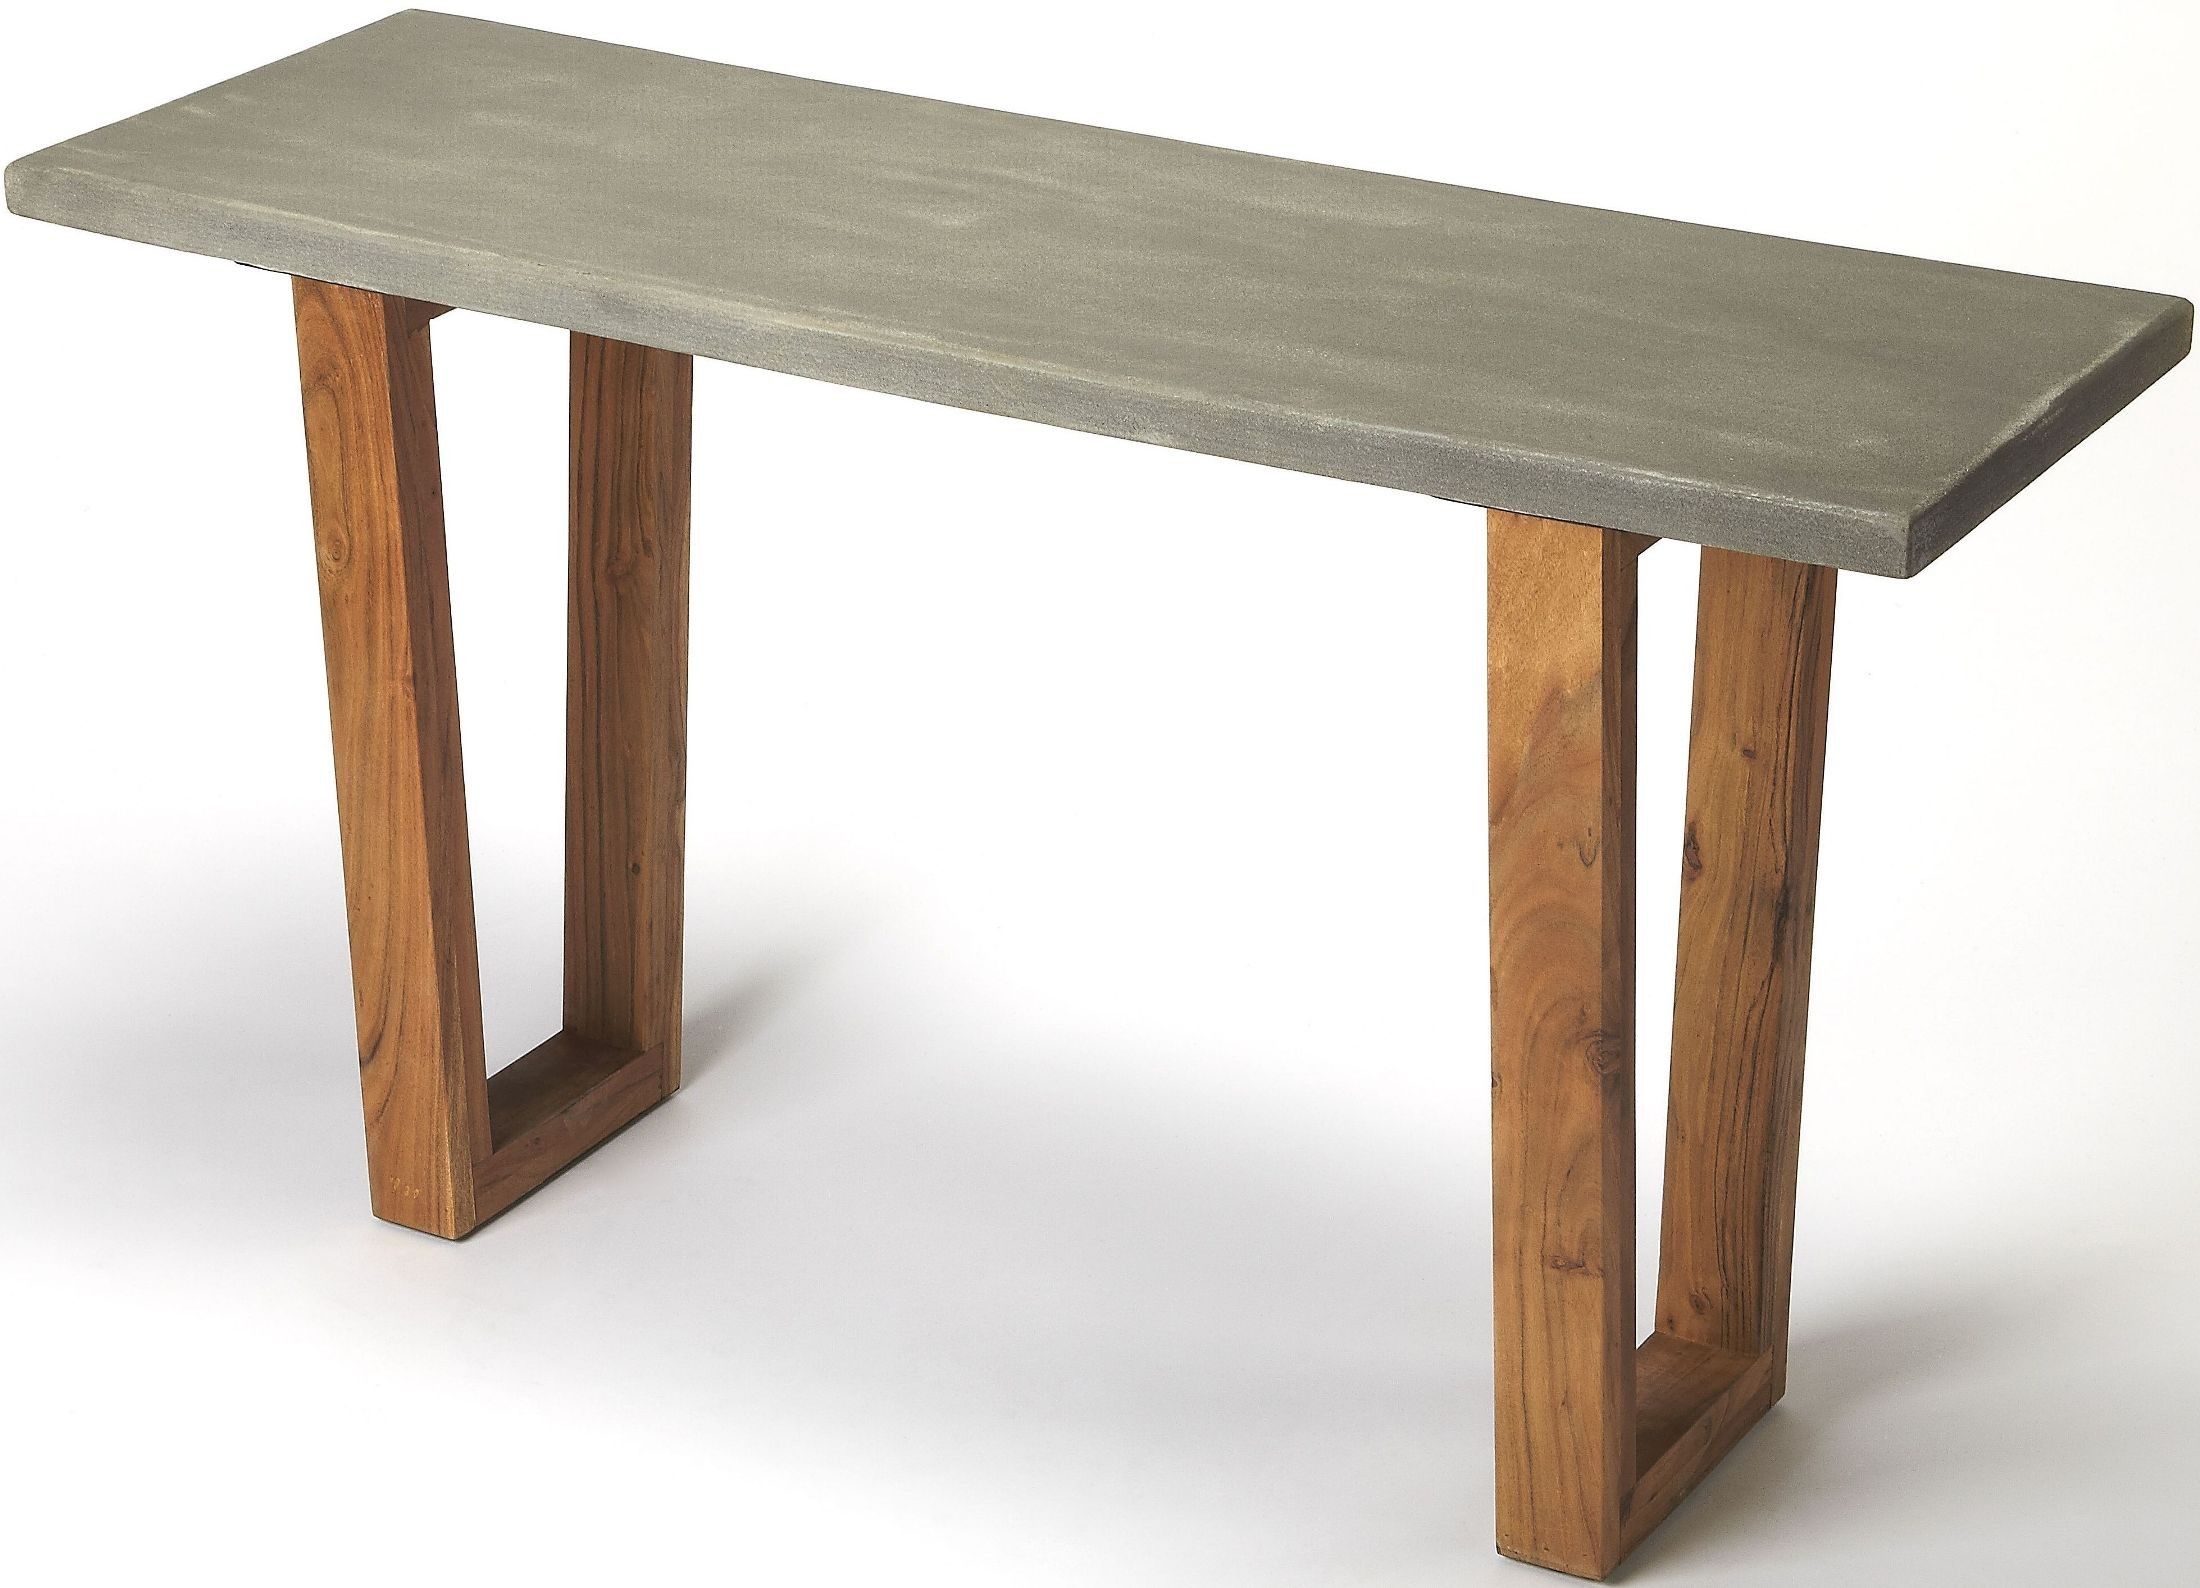 Butler Loft Massey Concrete And Wood Console Table From Butler Throughout Modern Concrete Console Tables (View 1 of 20)